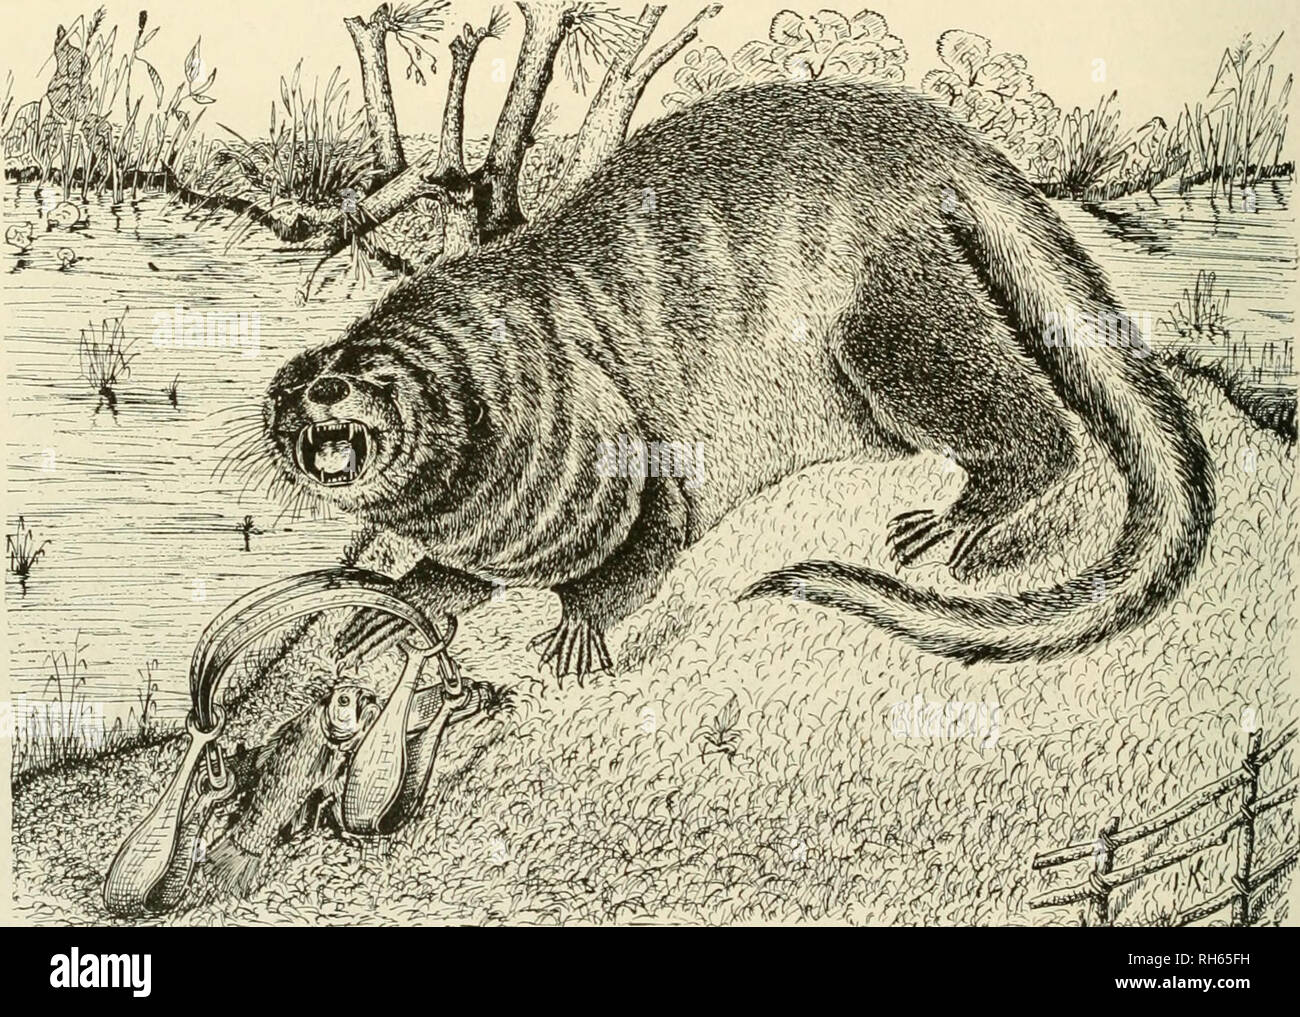 Brehm's Life of animals : a complete natural history for popular home  instruction and for the use of schools. Mammals; Animal behavior. 178 THE  BEASTS OF PREY. Story of "A well-known